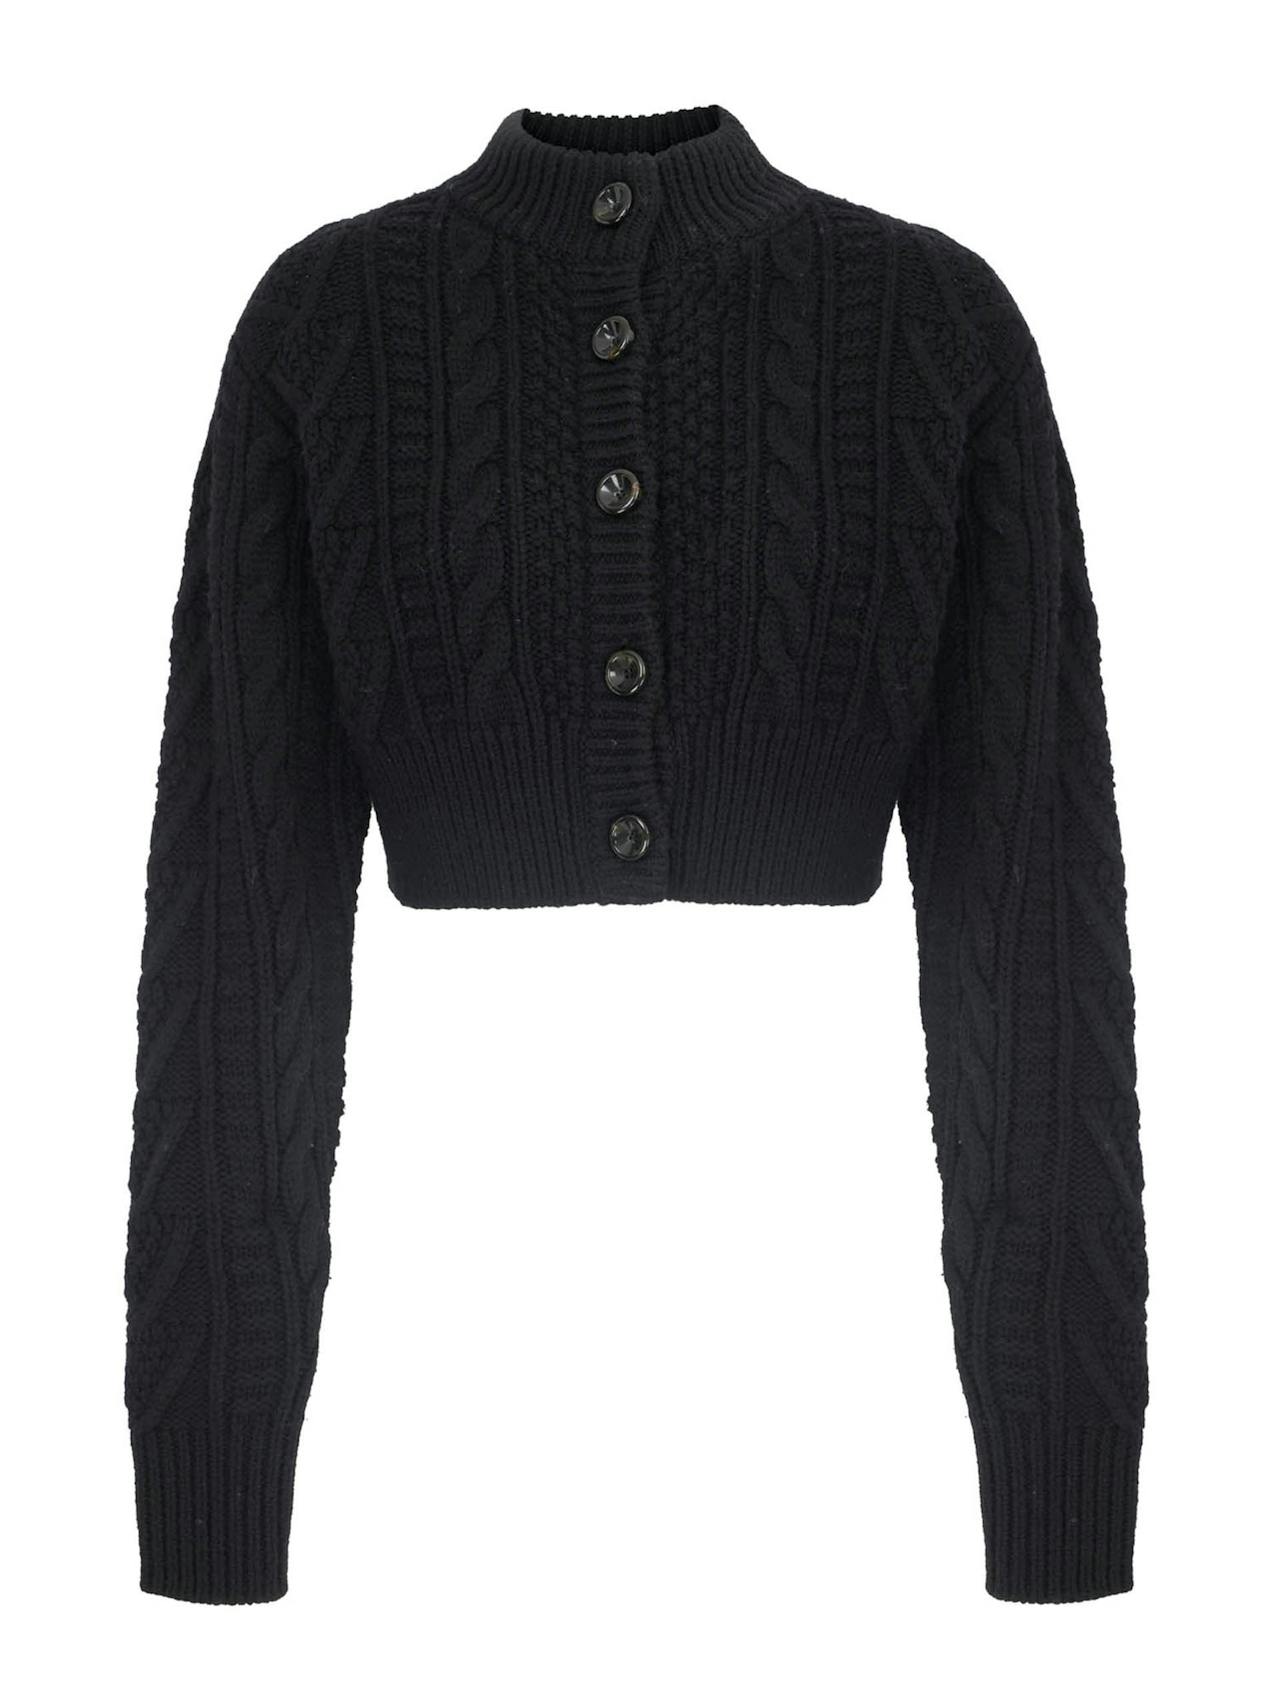 Black cable knit Aleph cardigan